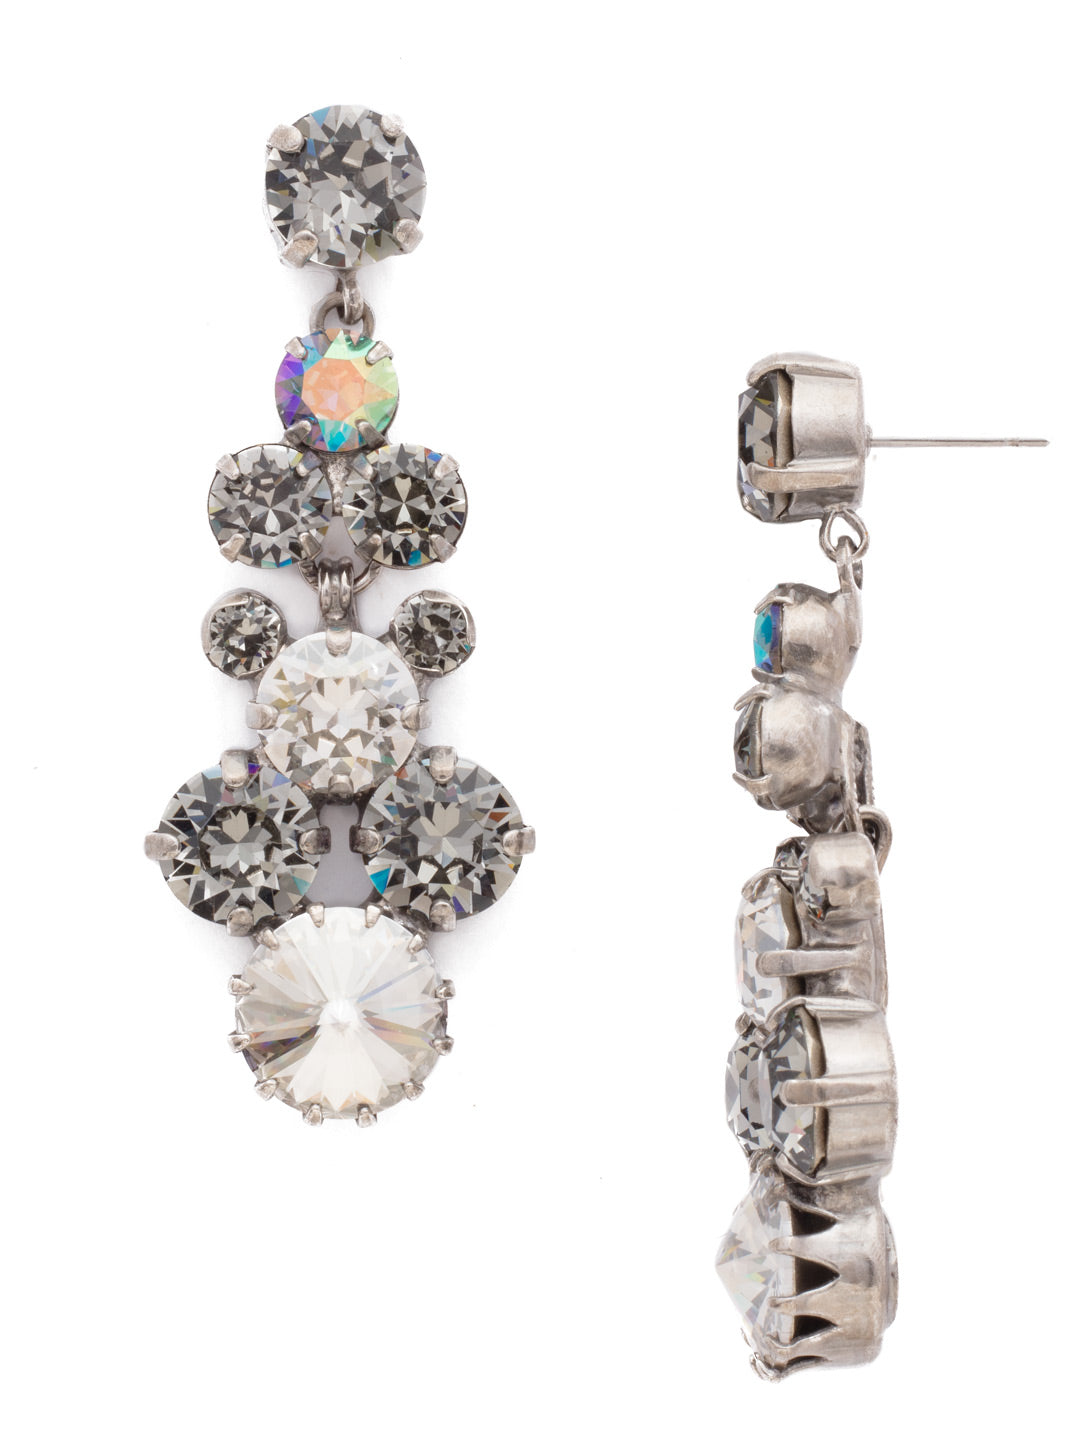 Well-Rounded Crystal Drop Dangle Earrings - EDH27ASCRO - Our Well-Rounded Crystal Drop Earring features an array of round crystals cascading from a post. Crystal clusters form this exquisite earring for a magnificent statement. From Sorrelli's Crystal Rock collection in our Antique Silver-tone finish.